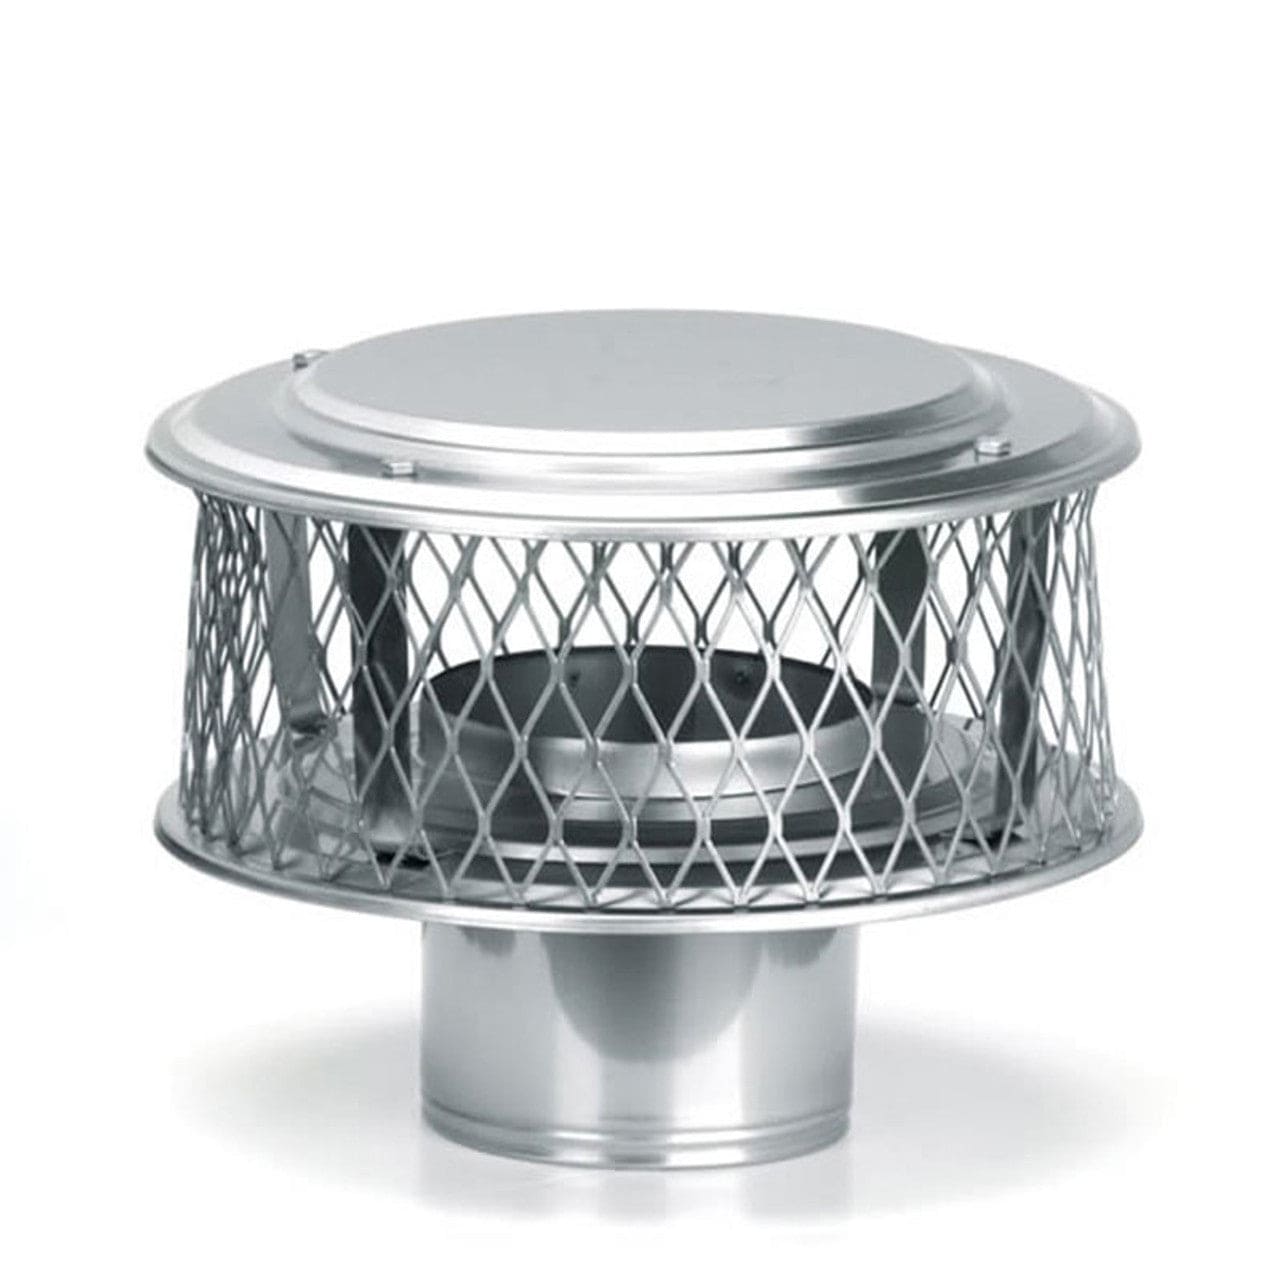 7" HomeSaver 304-Alloy Stainless Steel Guardian Cap with 3/4" Mesh - Chimney Cricket